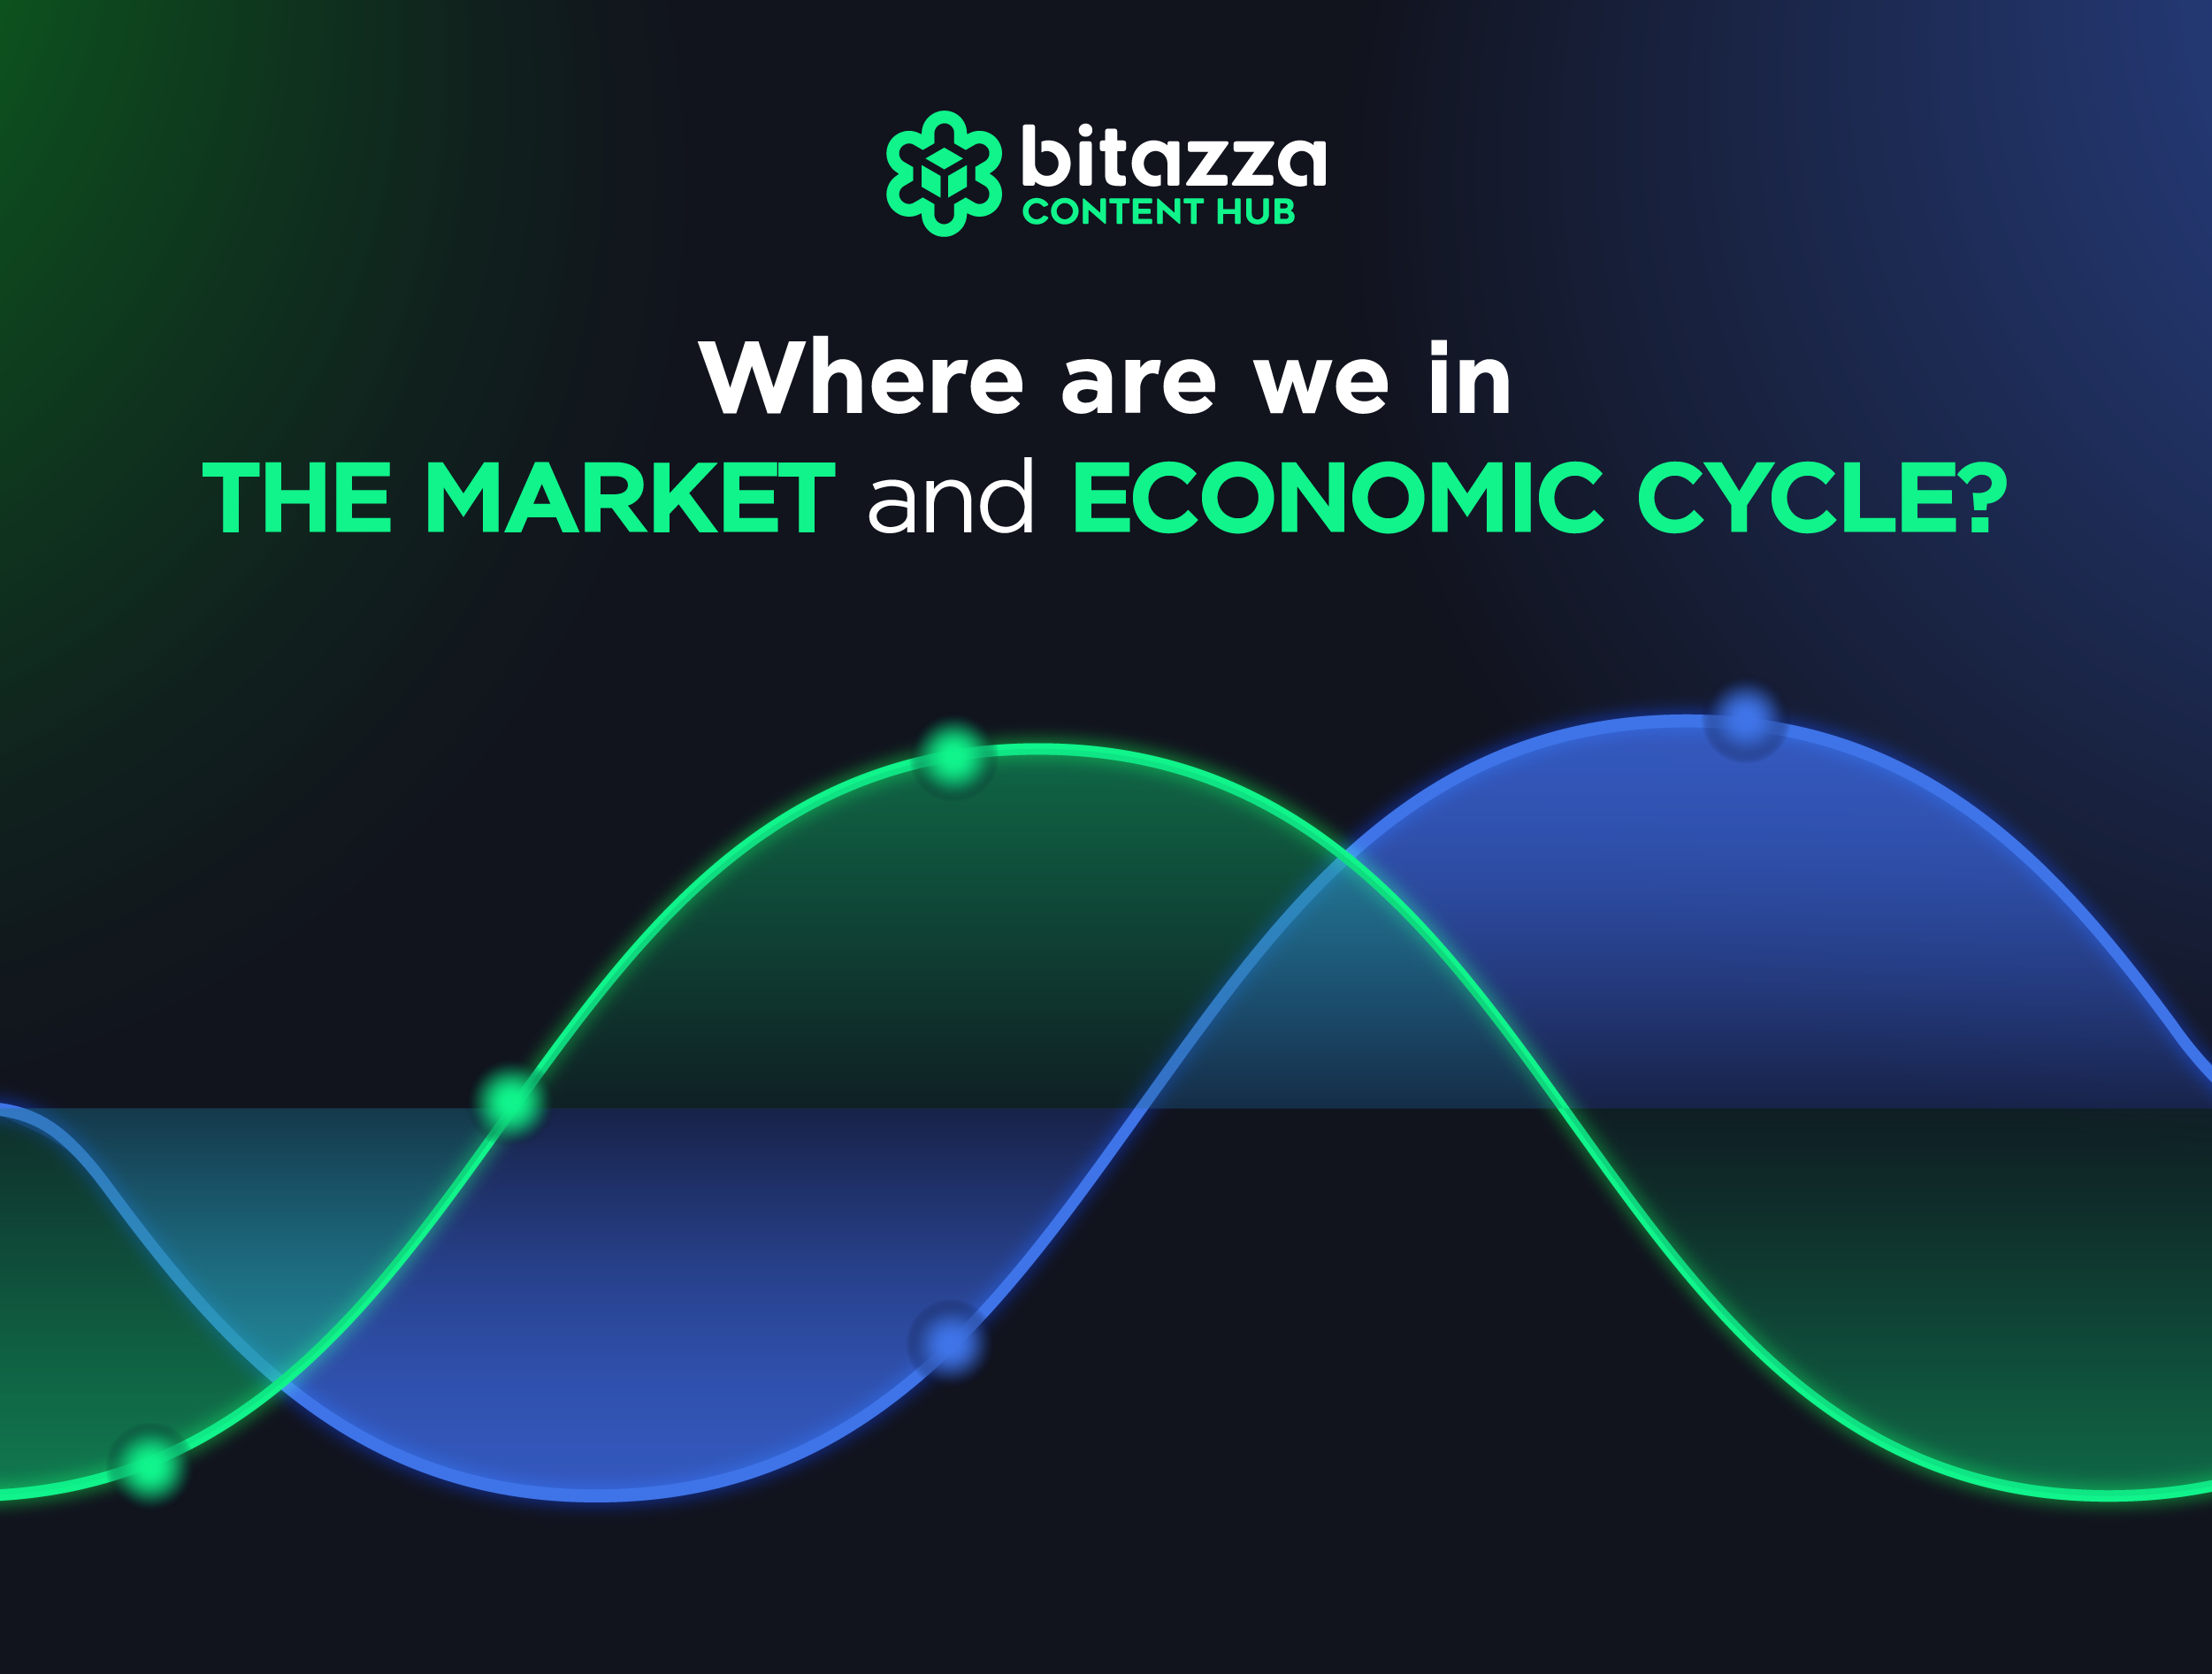 Where are we in the market and economic cycle?